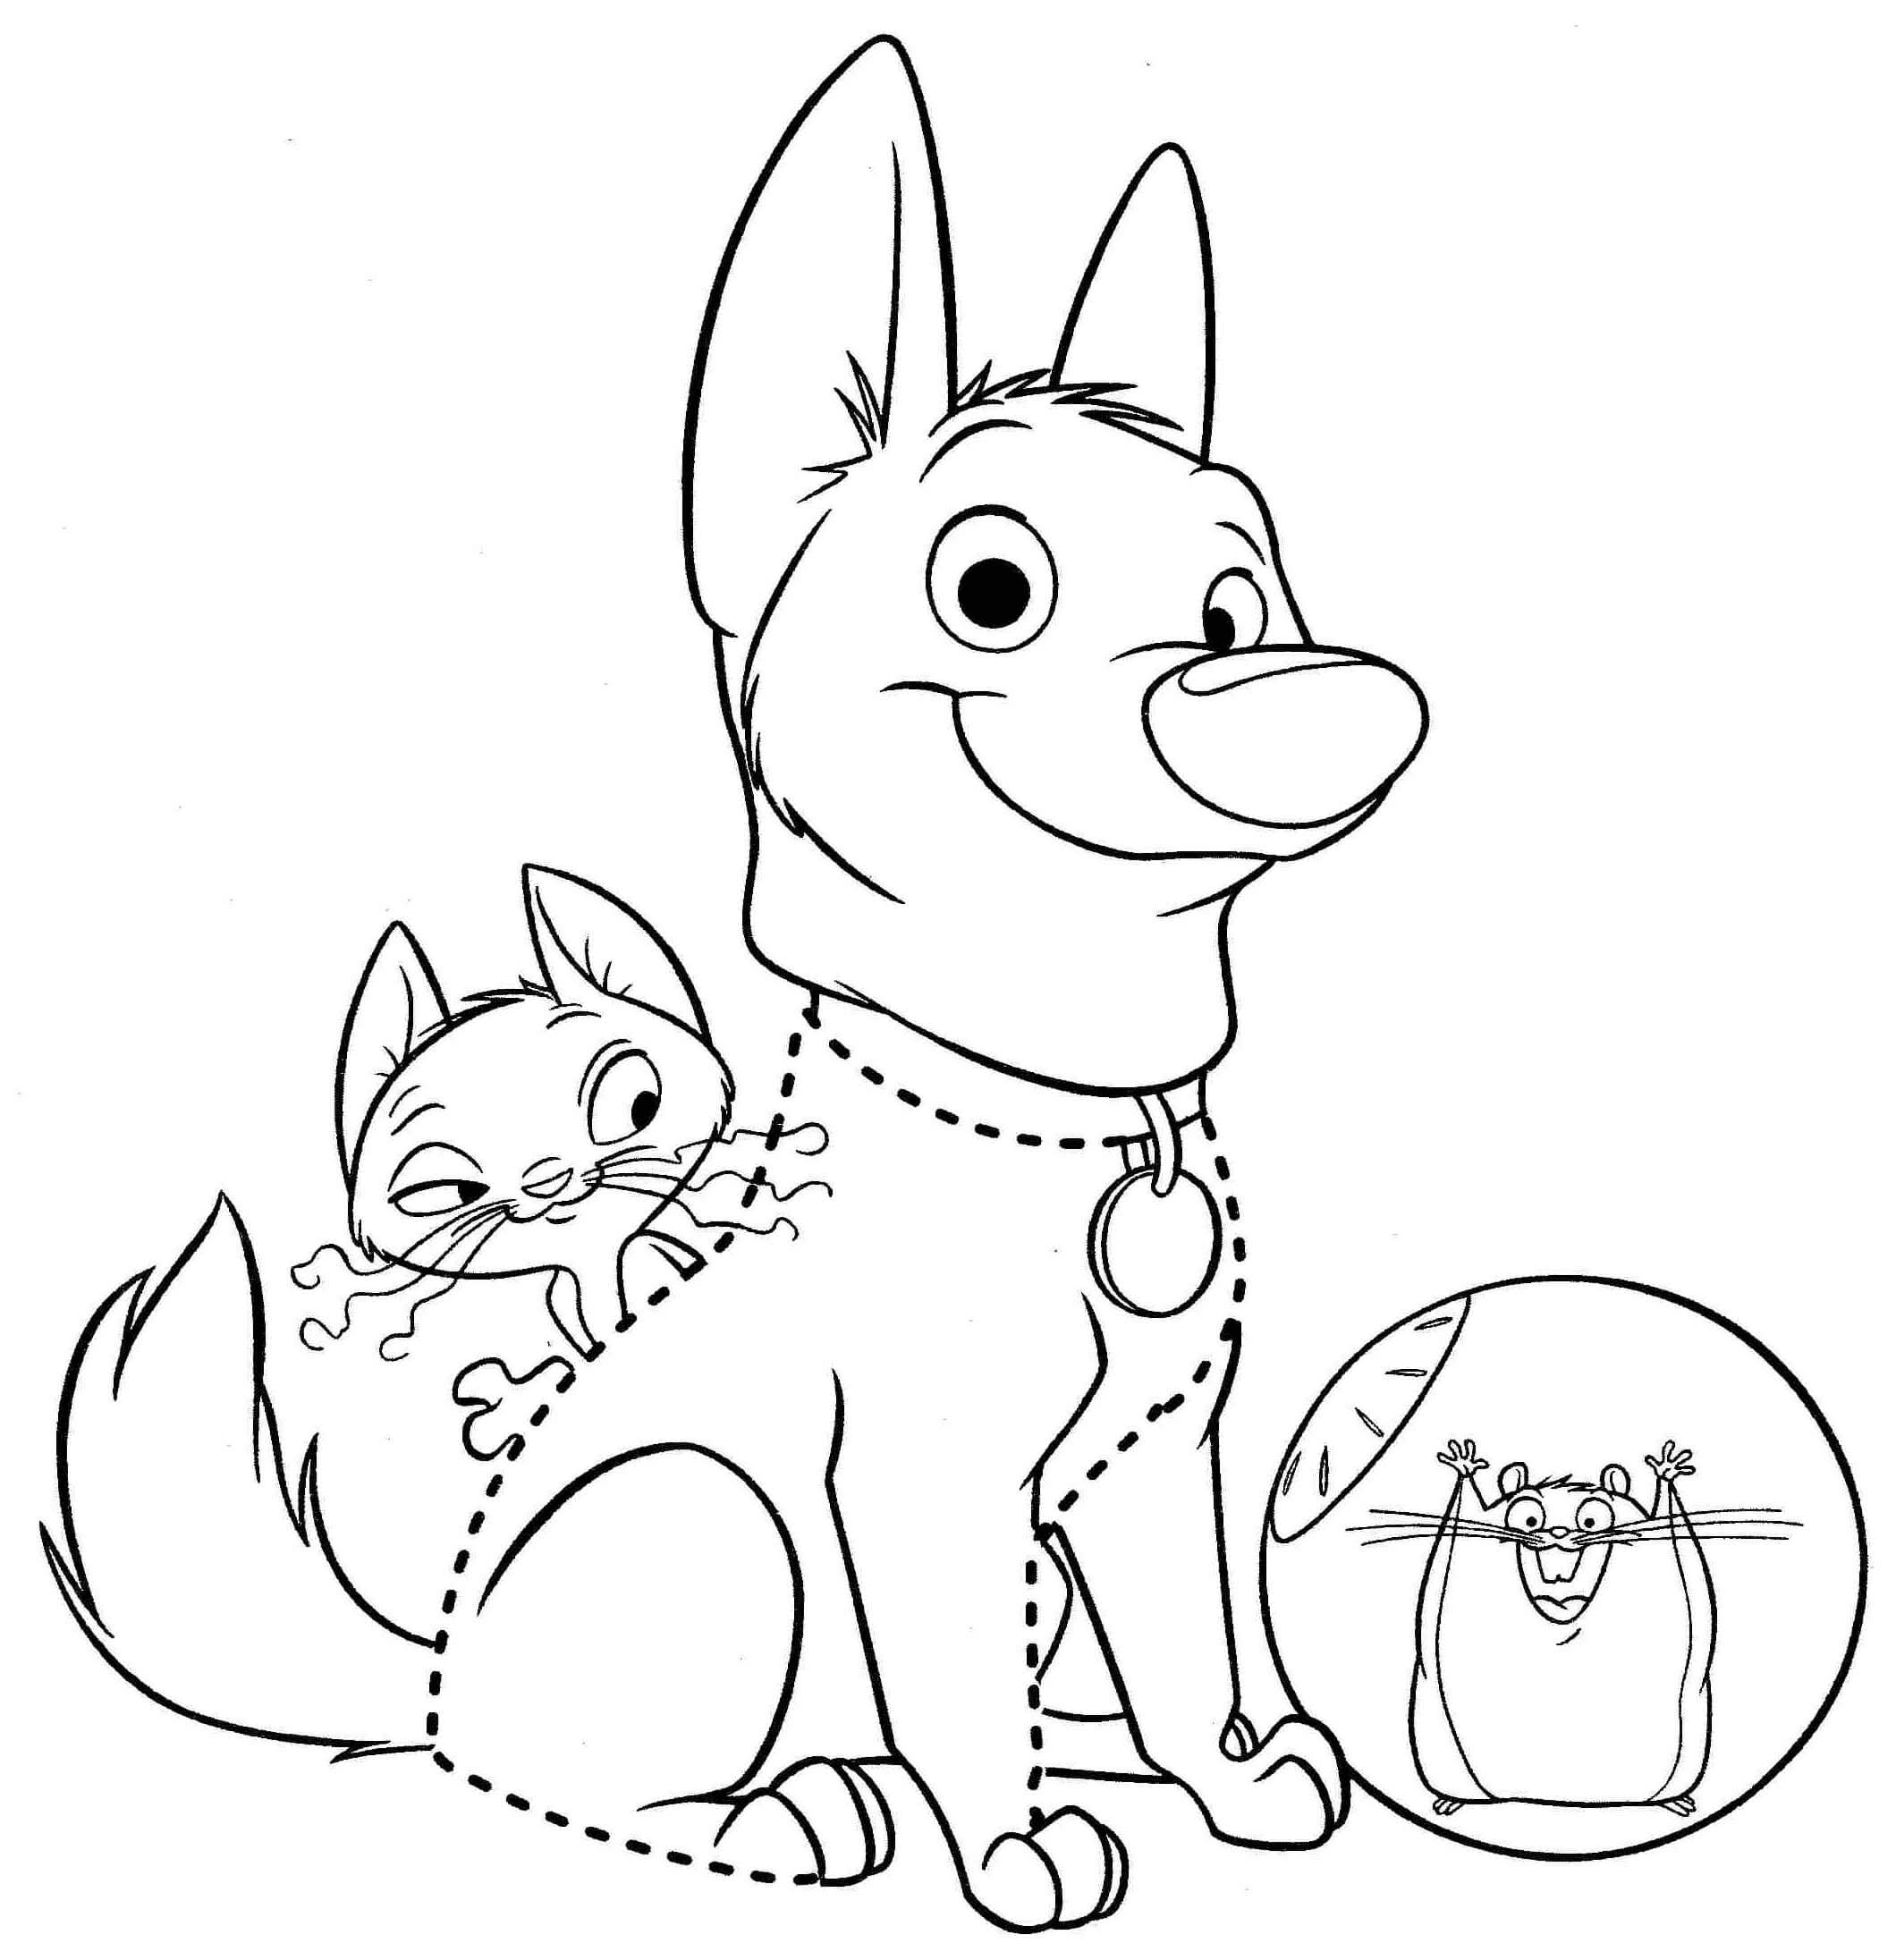 Bolt, Mittens, Rhino Coloring Page